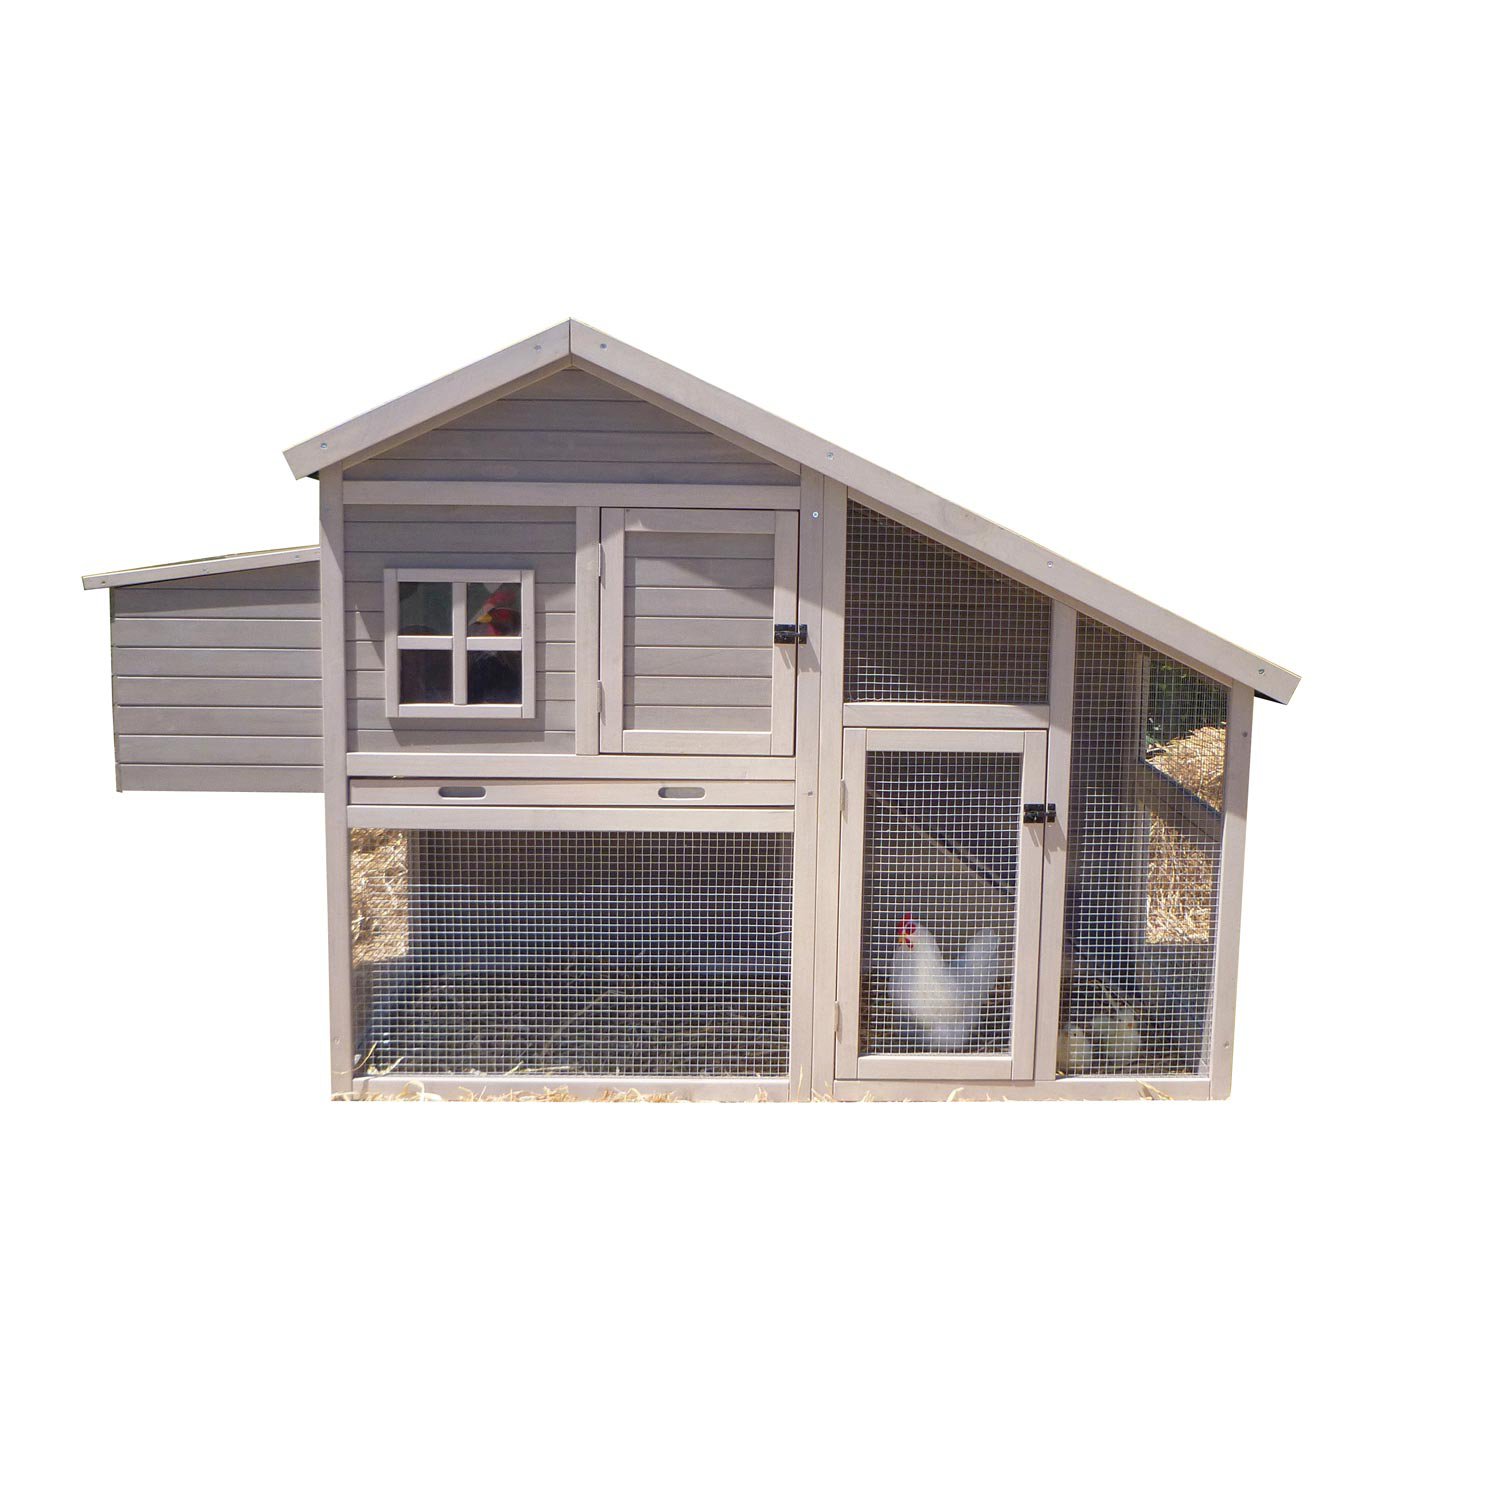 Chicken Coops for Sale: Chicken Runs, Houses &amp; Kits | Petco